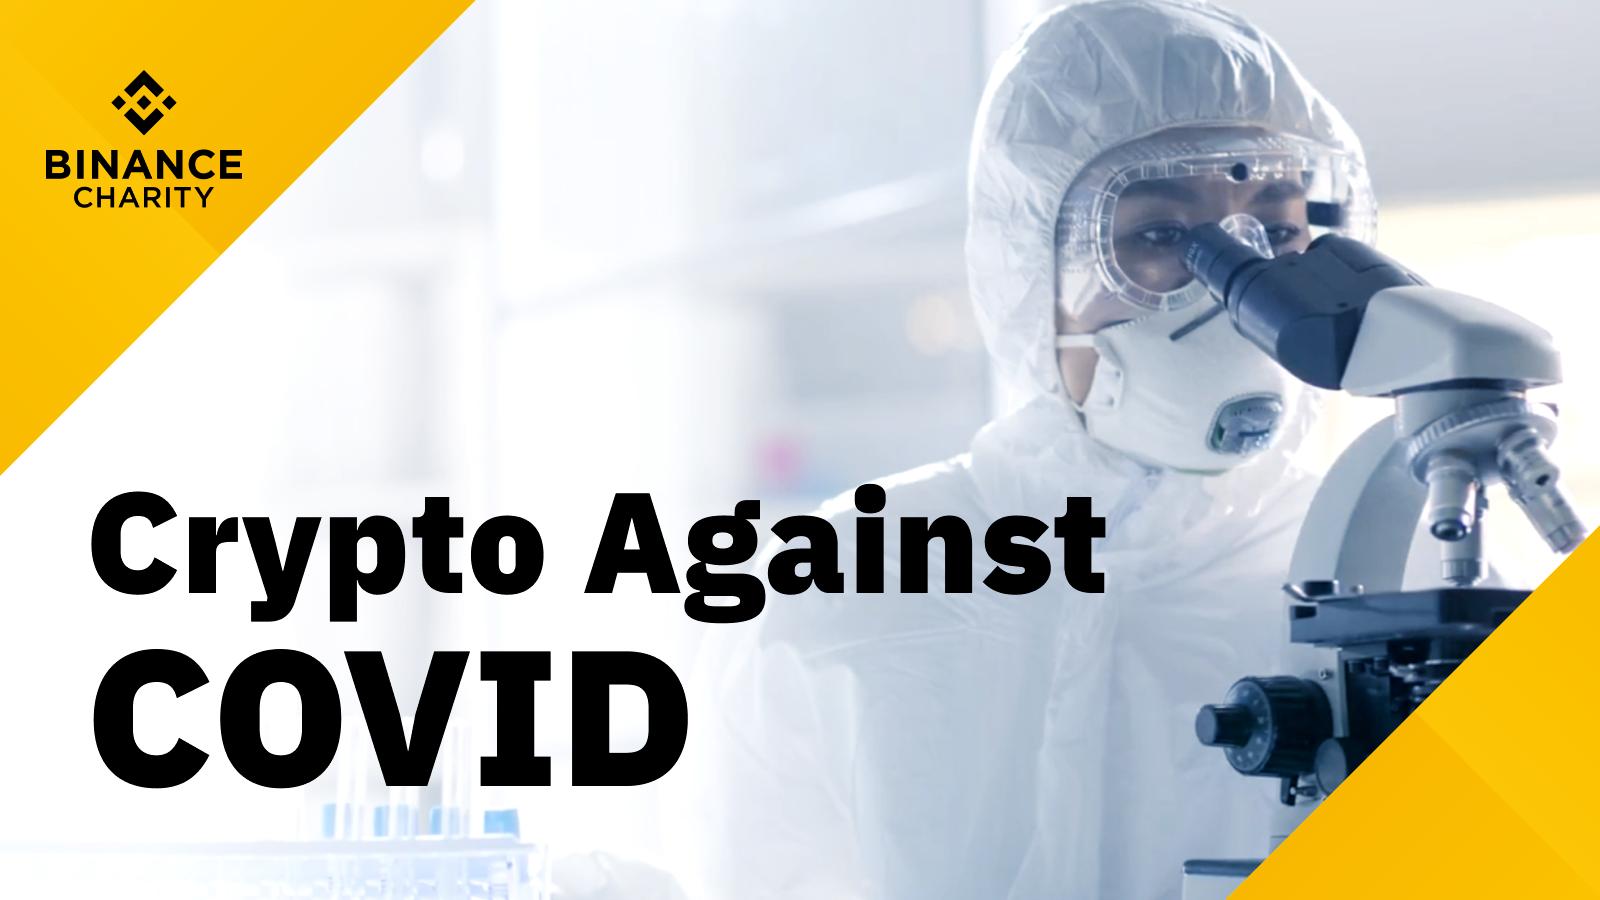 Crypto Against COVID - Binance Charity, with Operations in ...